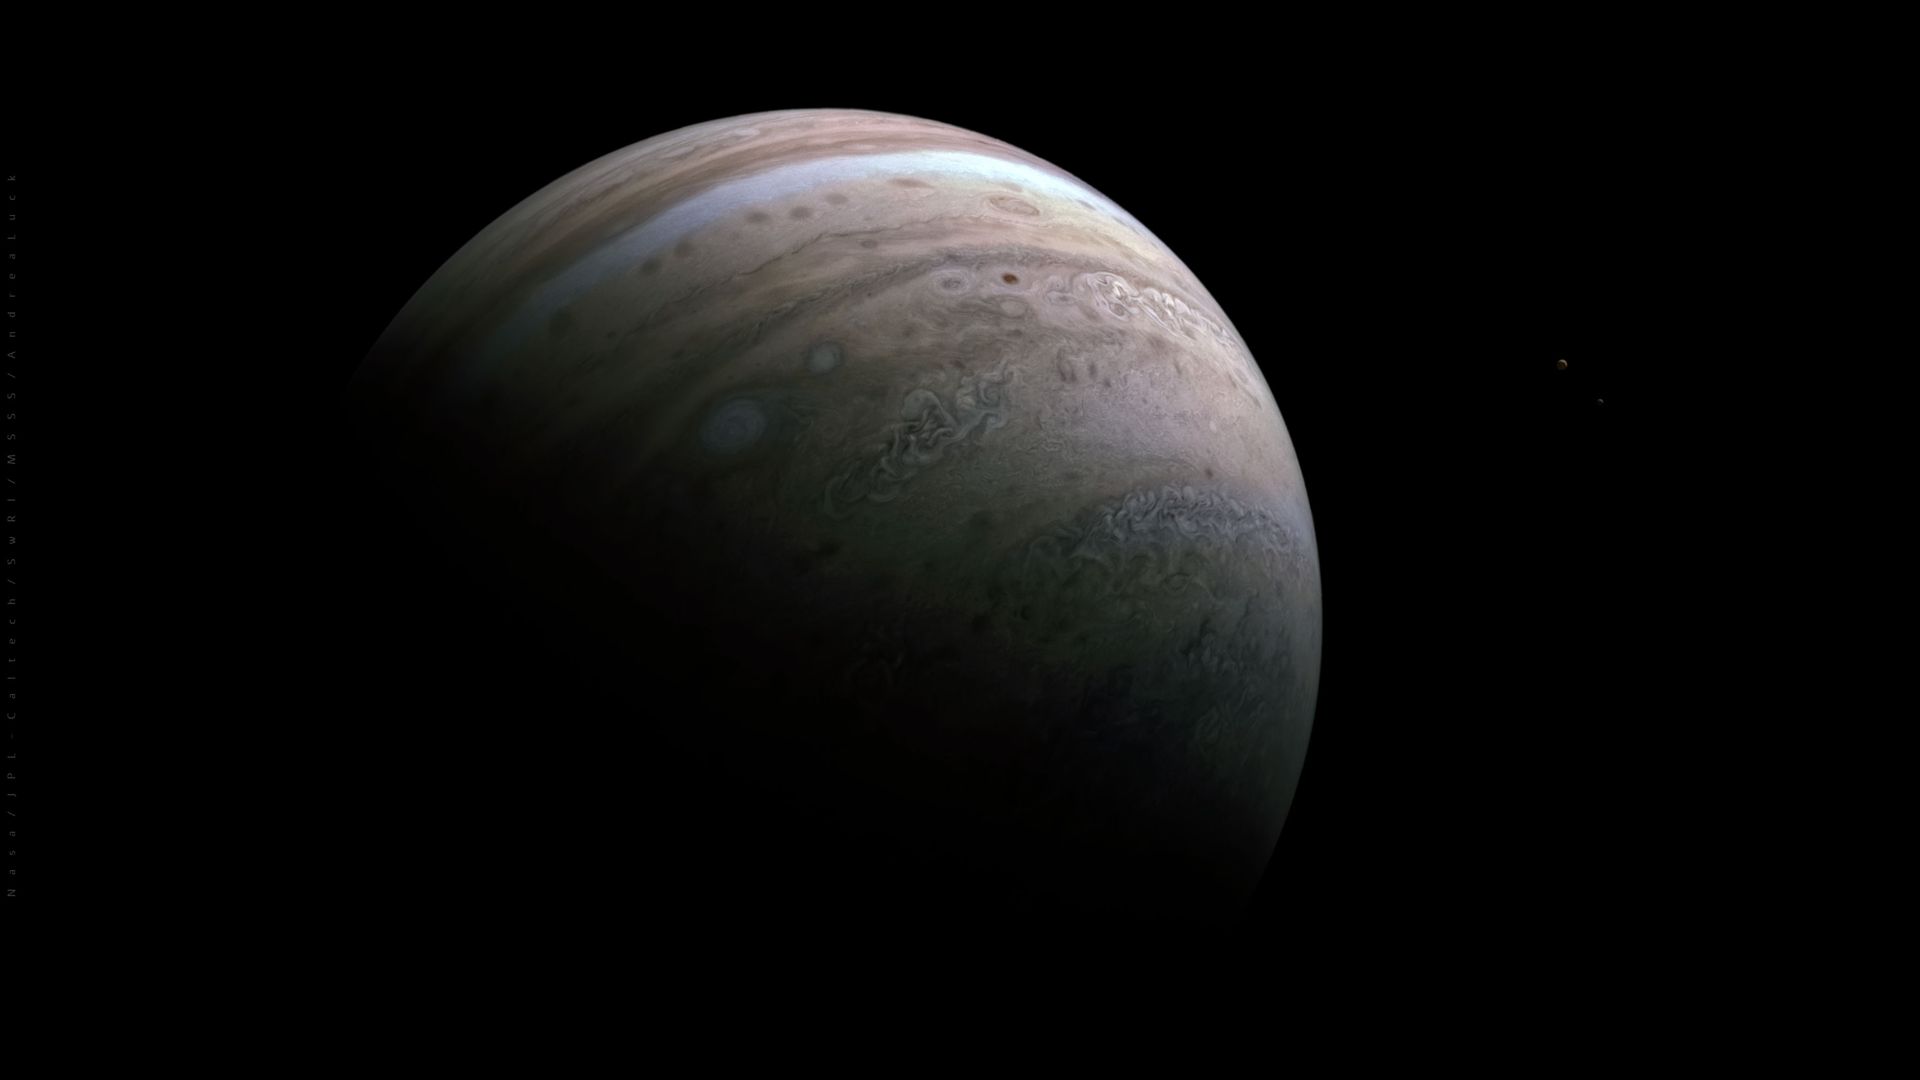 A view of Jupiter's southern hemisphere captured by NASA’s Juno spacecraft in January 2022.